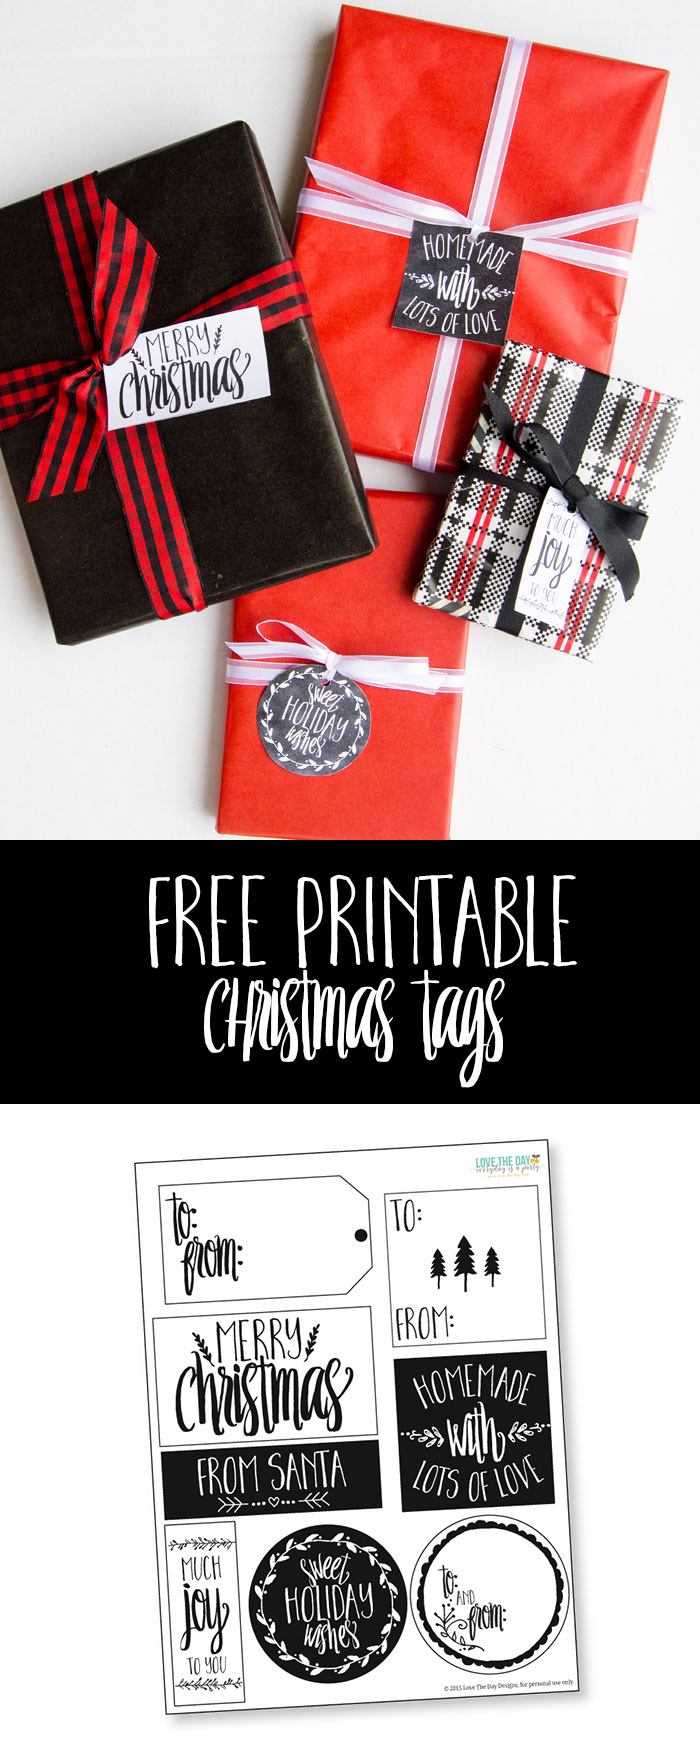 FREE Printable Christmas Gift Tags by Love The Day